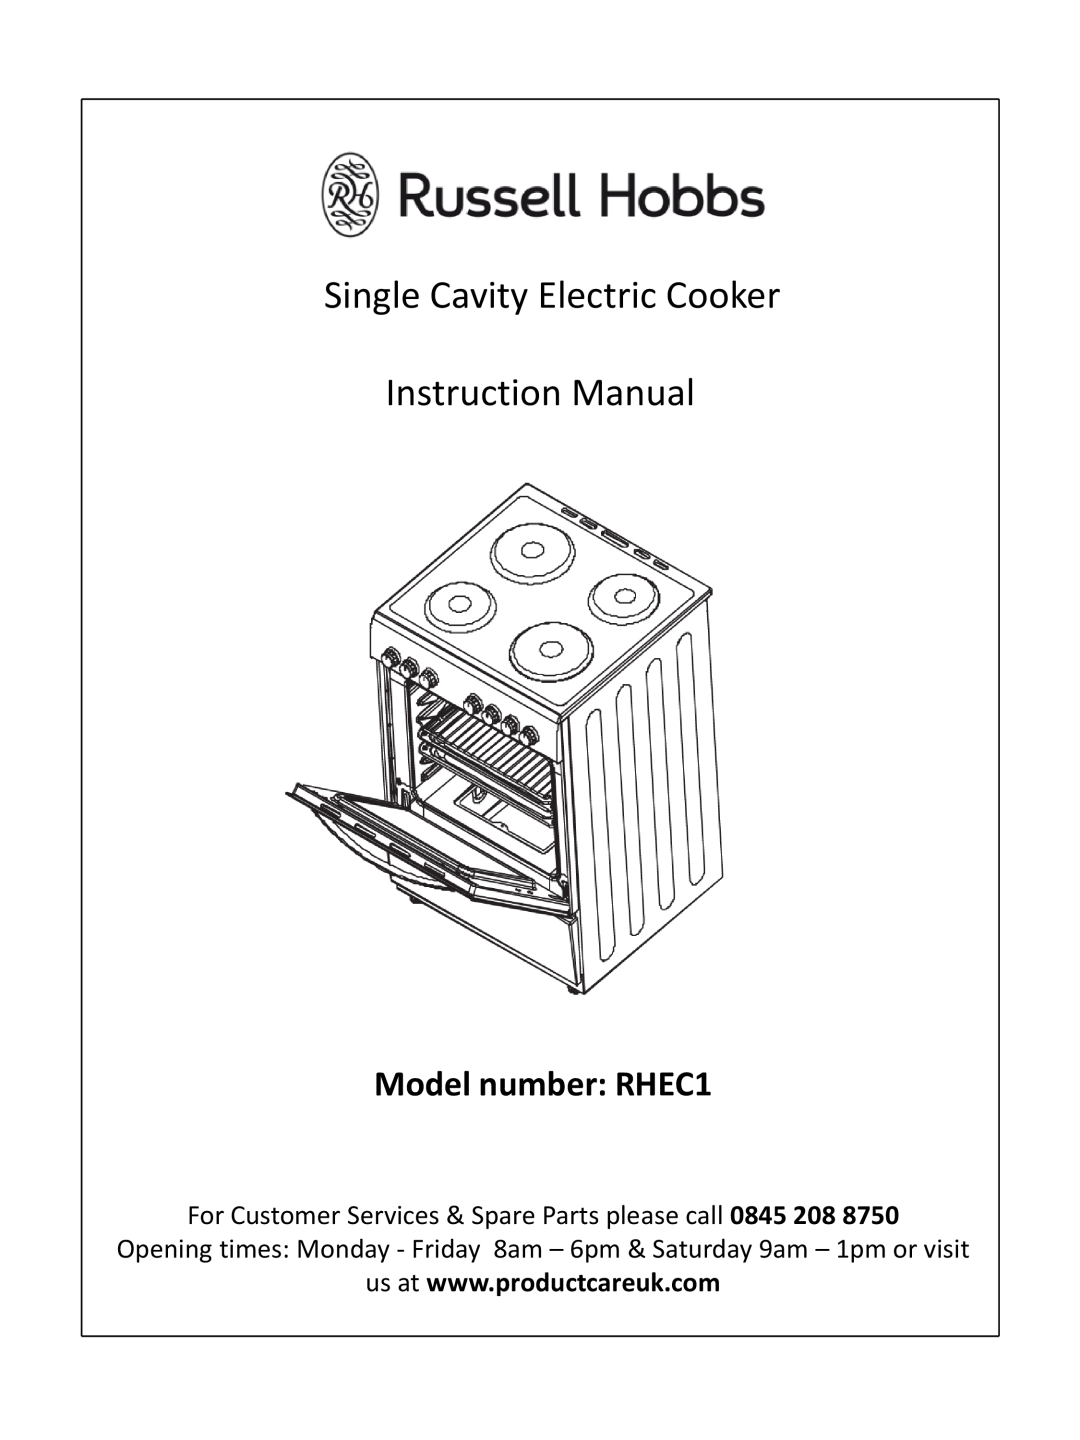 Russell Hobbs instruction manual Single Cavity Electric Cooker Instruction Manual, Model number: RHEC1 